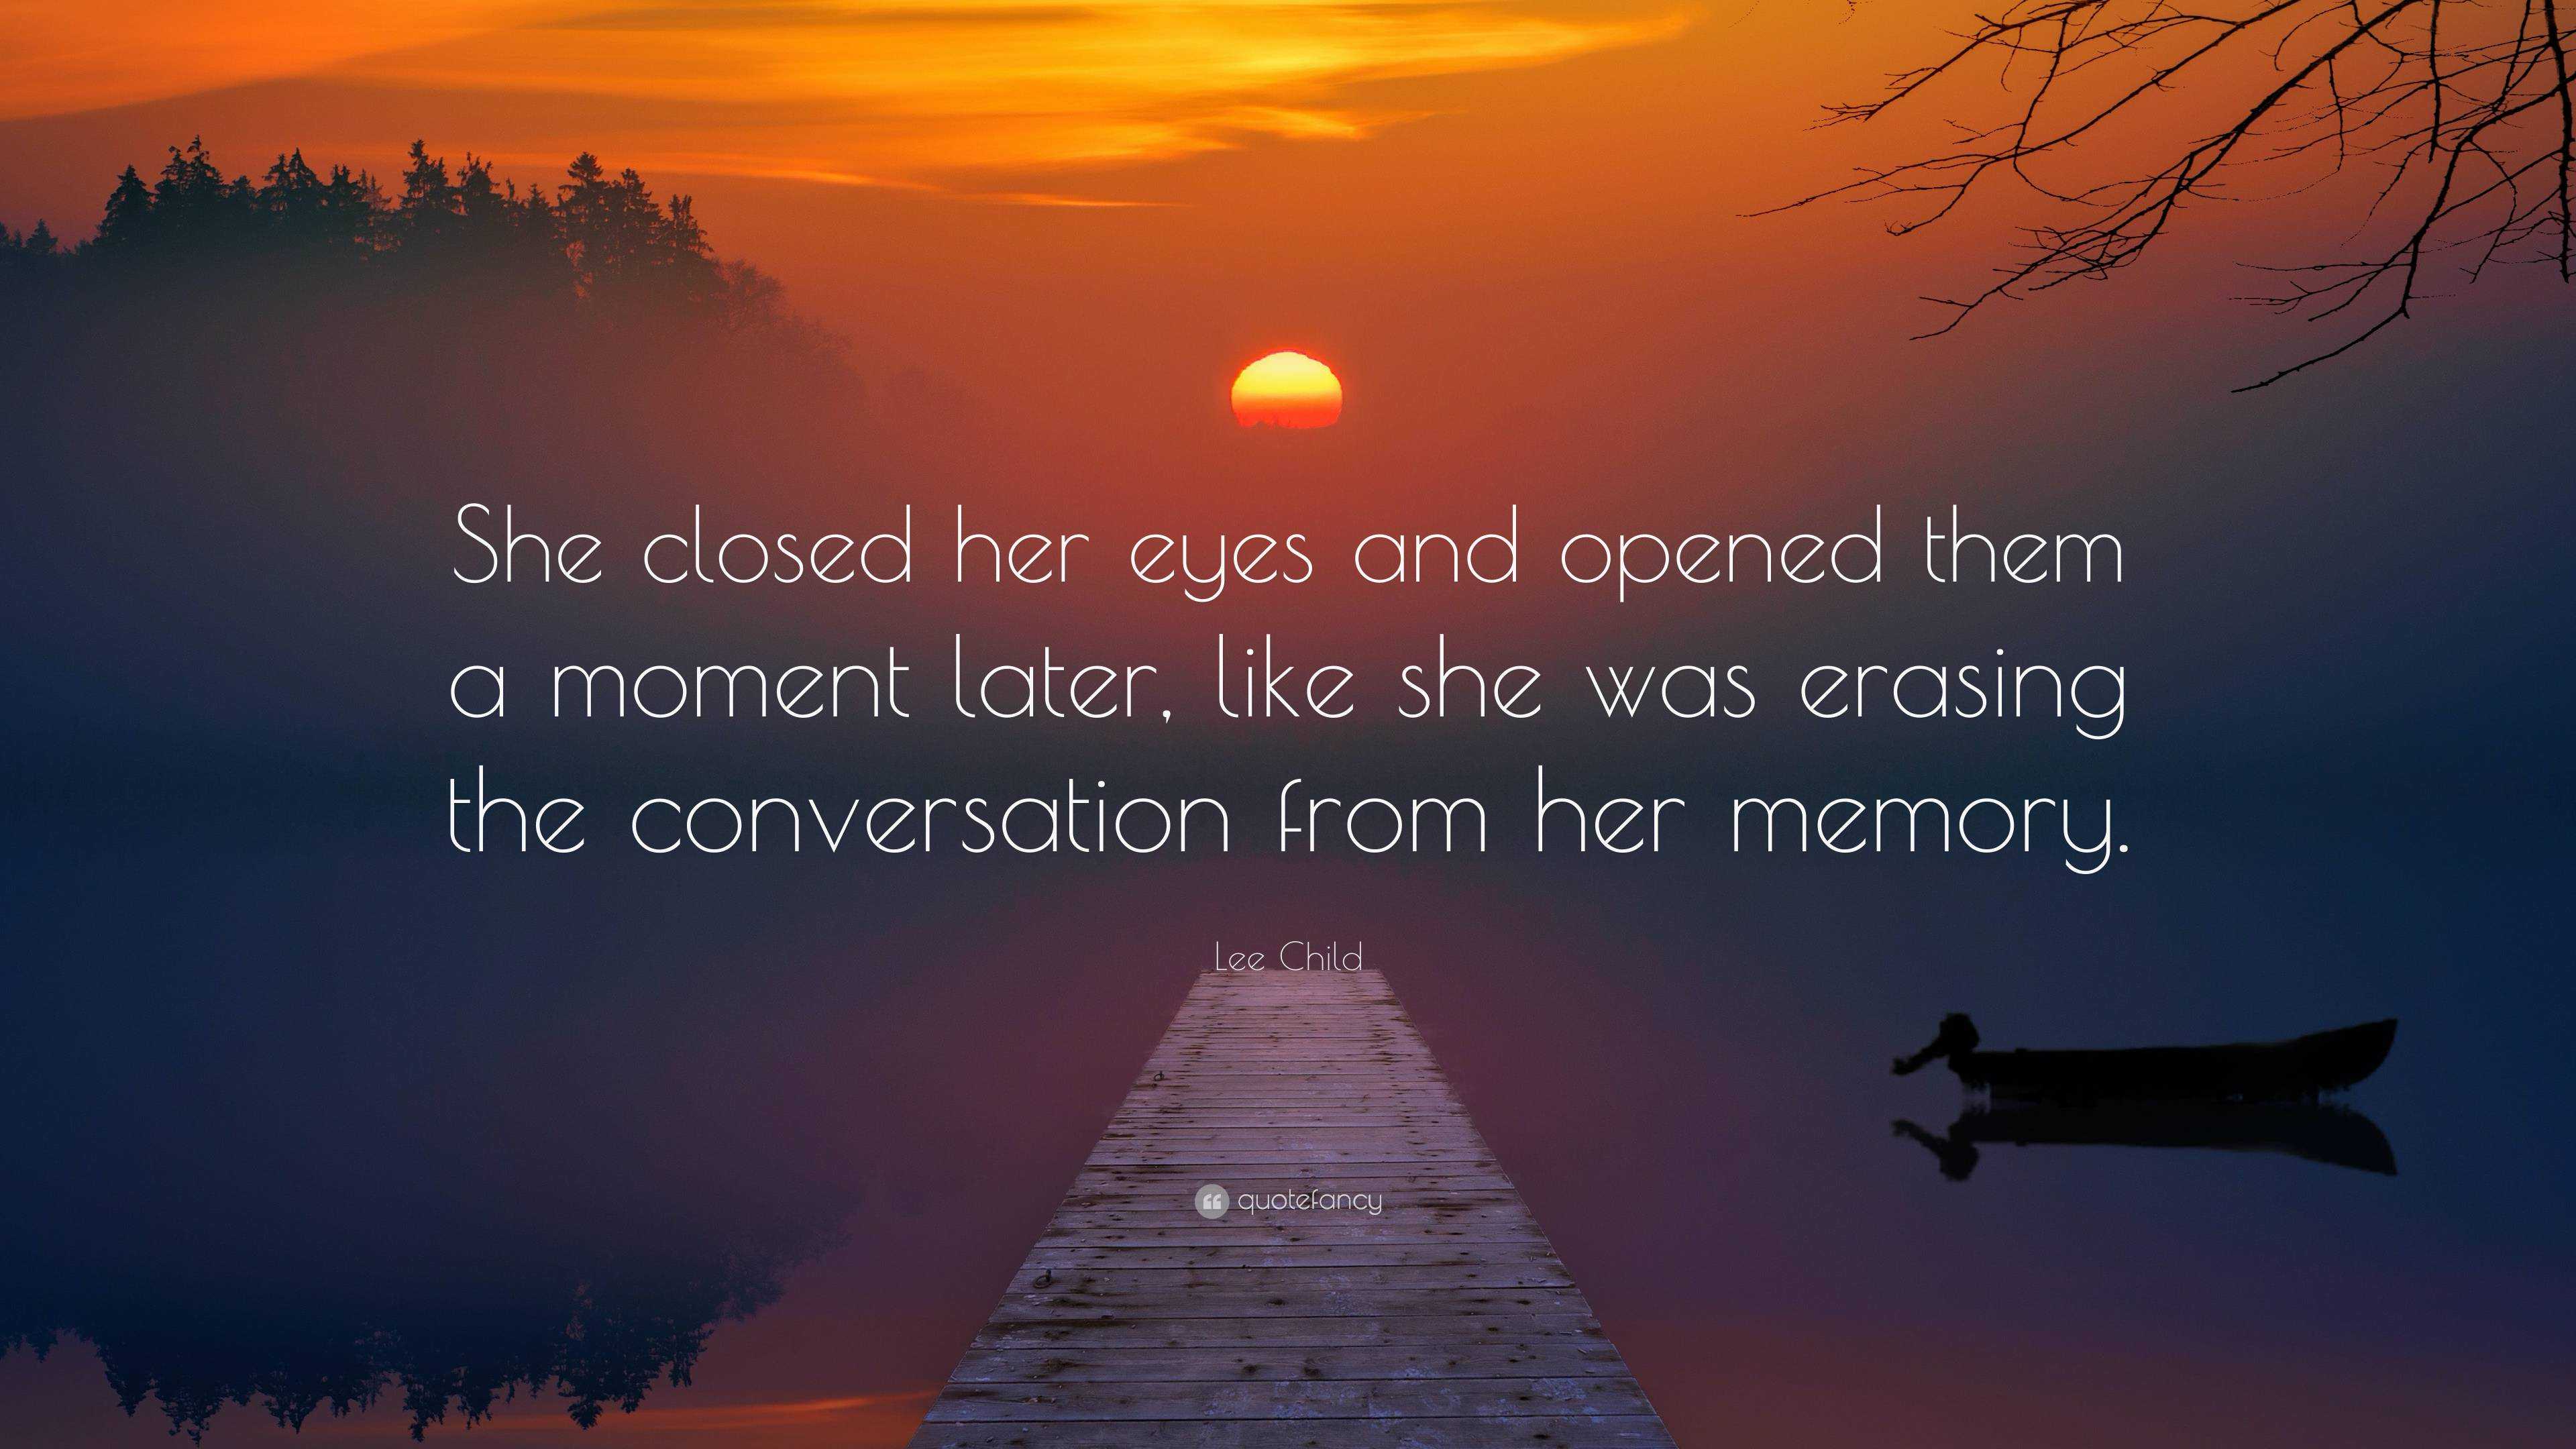 Lee Child Quote: “She closed her eyes and opened them a moment later ...